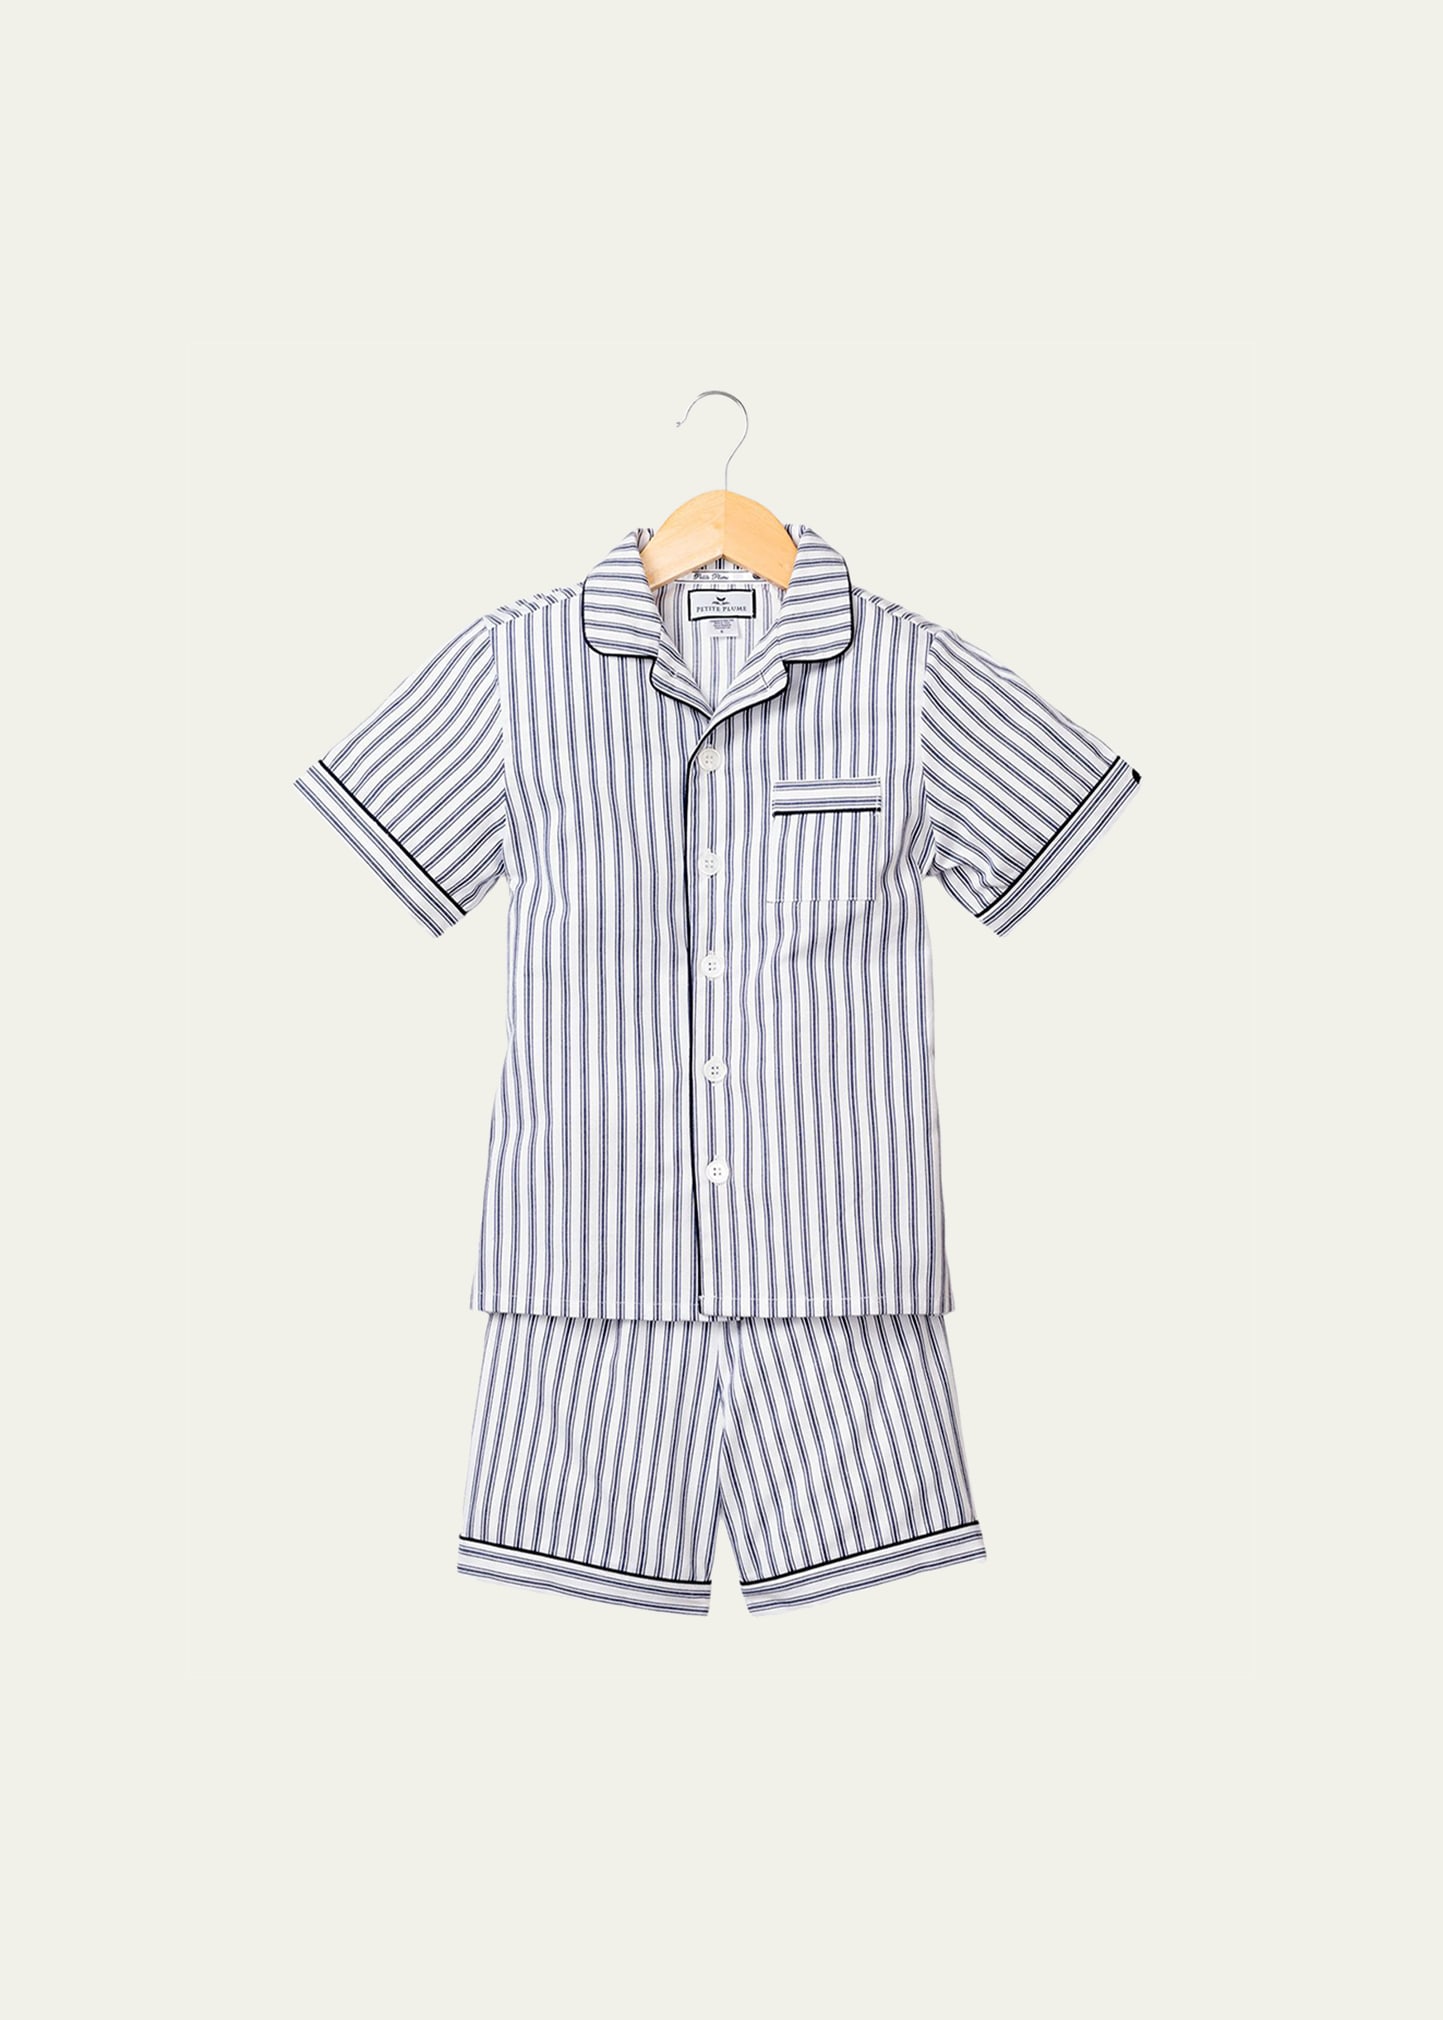 Kid's French Ticking Striped Pajama Set w/ Contrast Piping, Size 6M-14